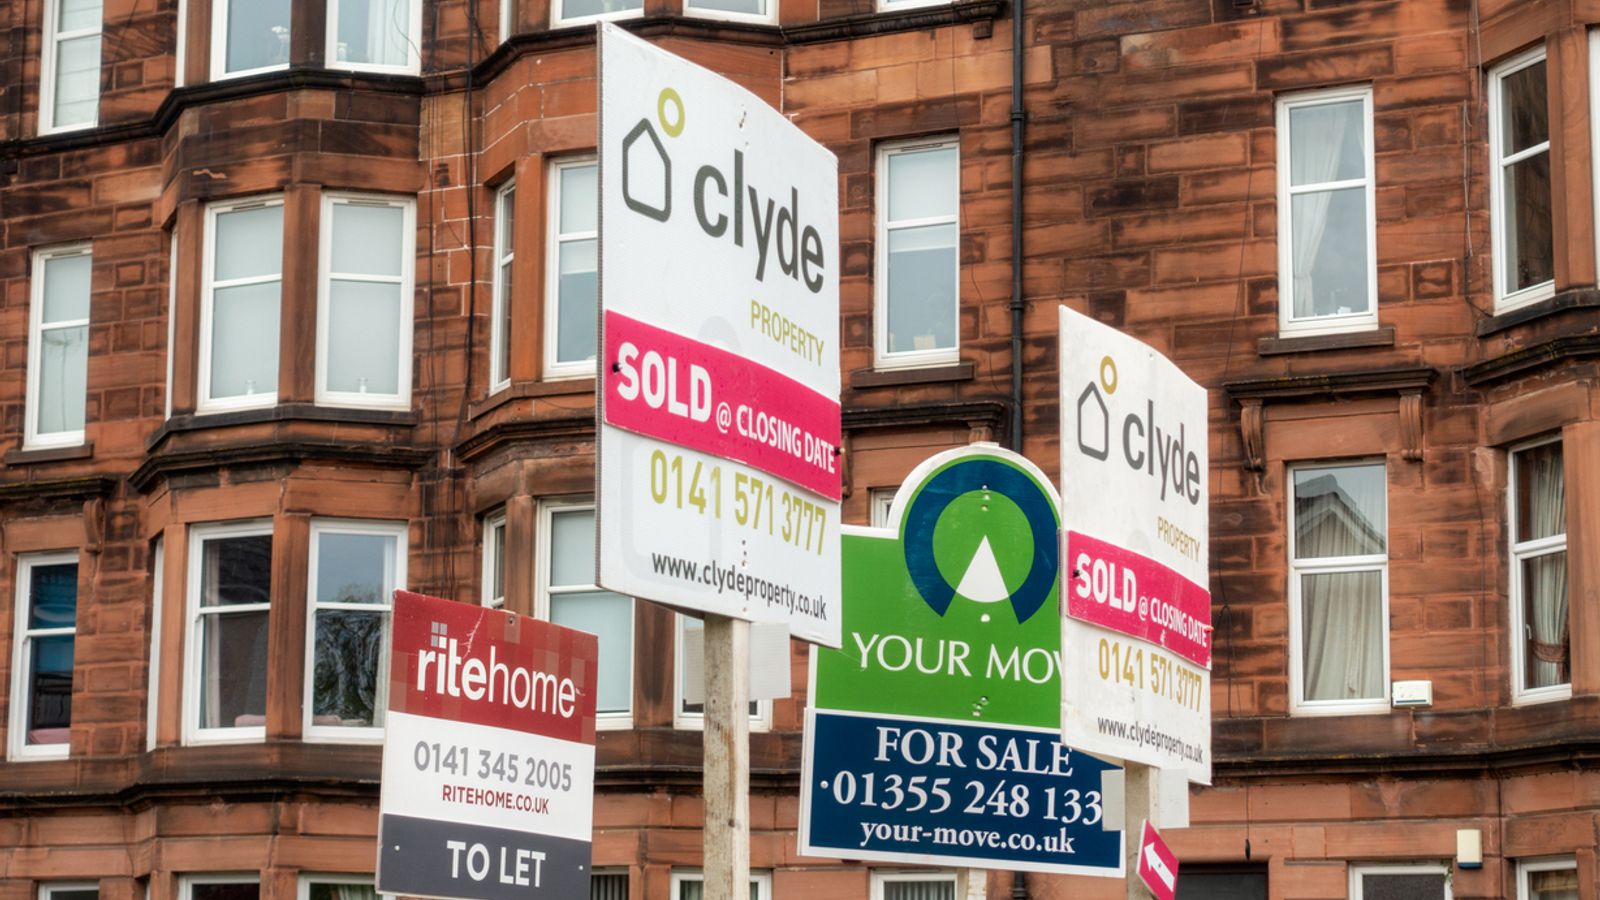 Do you really need an estate agent to sell your home?